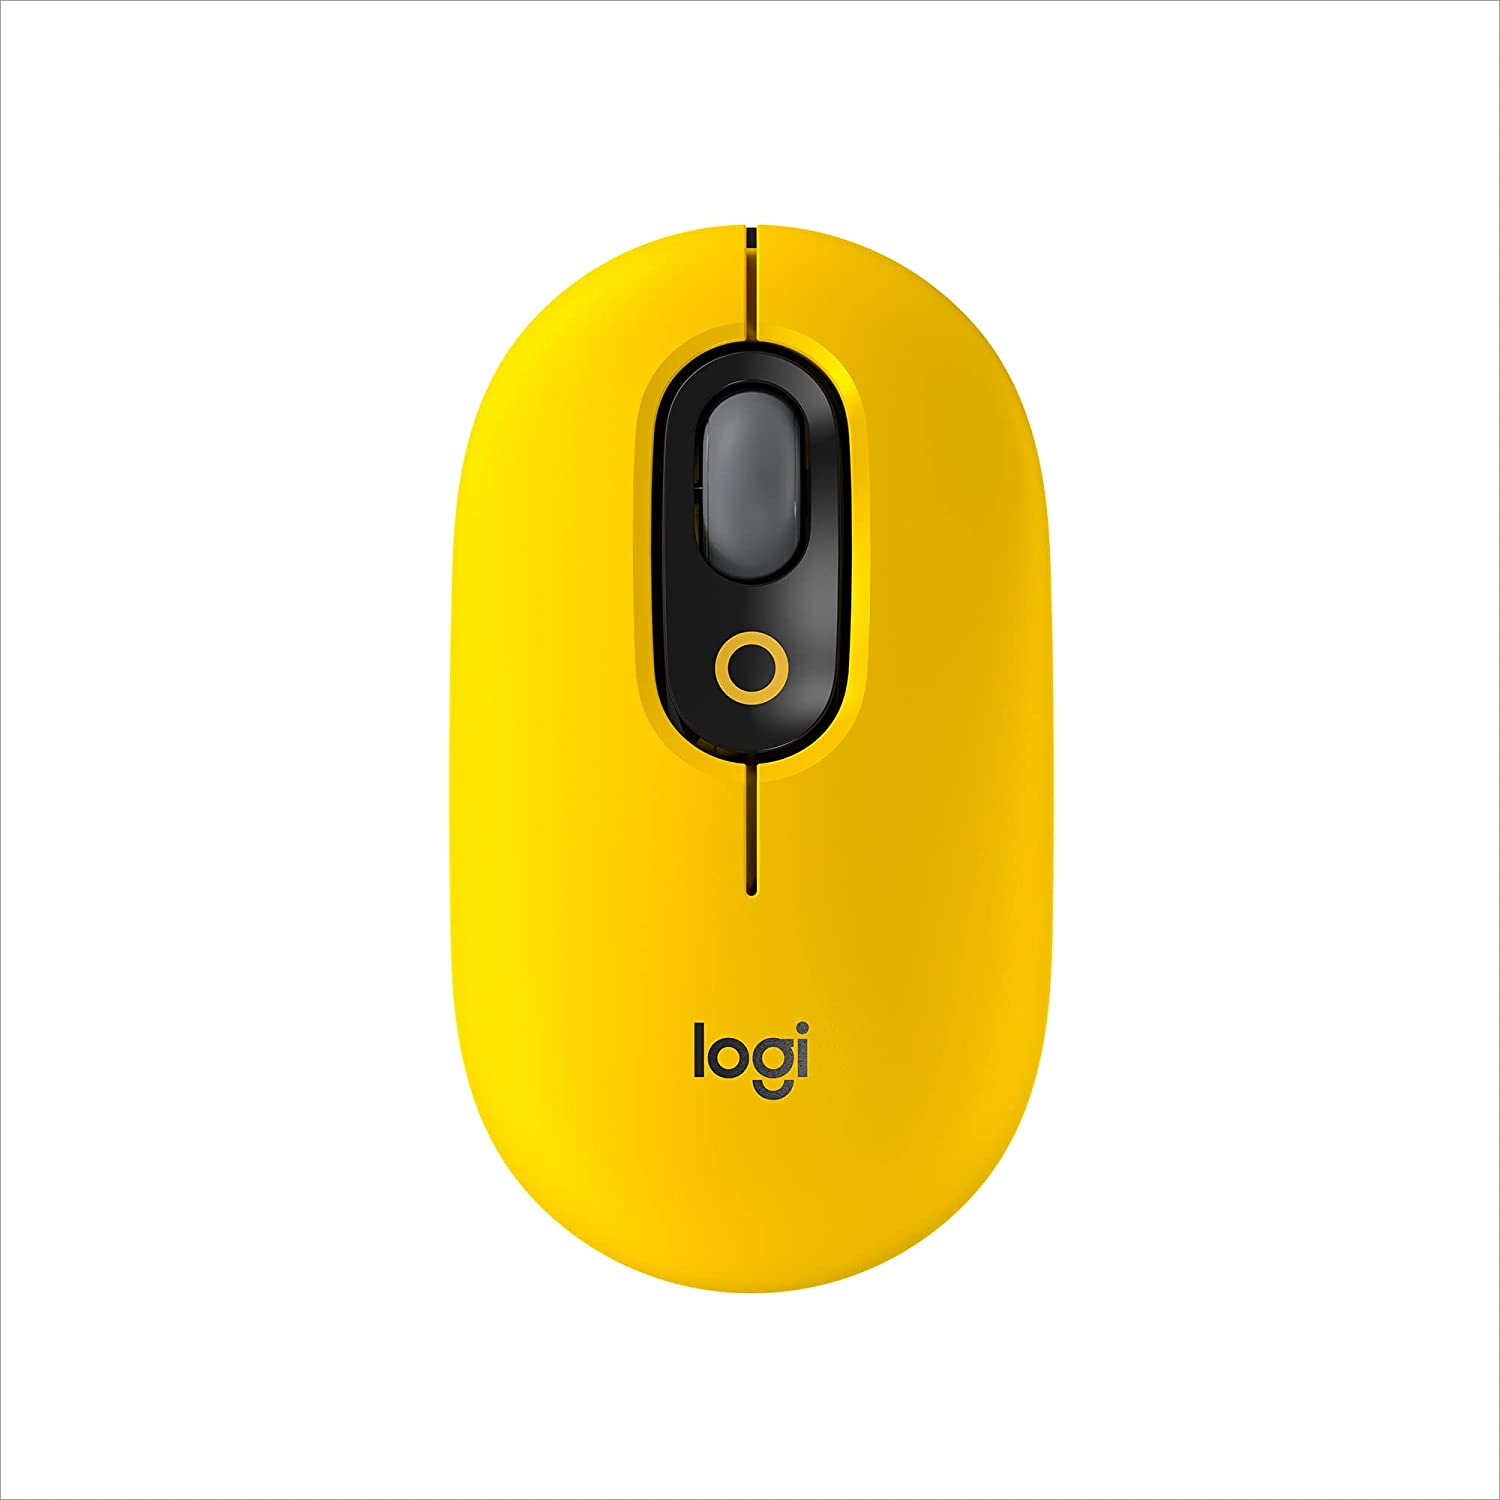 Logitech POP Mouse, Wireless Mouse with Customizable Emojis, Silenttouch Technology, Precision/Speed Scroll, Compact Design, Bluetooth, USB, Multi-Device, OS Compatible - Blast Yellow